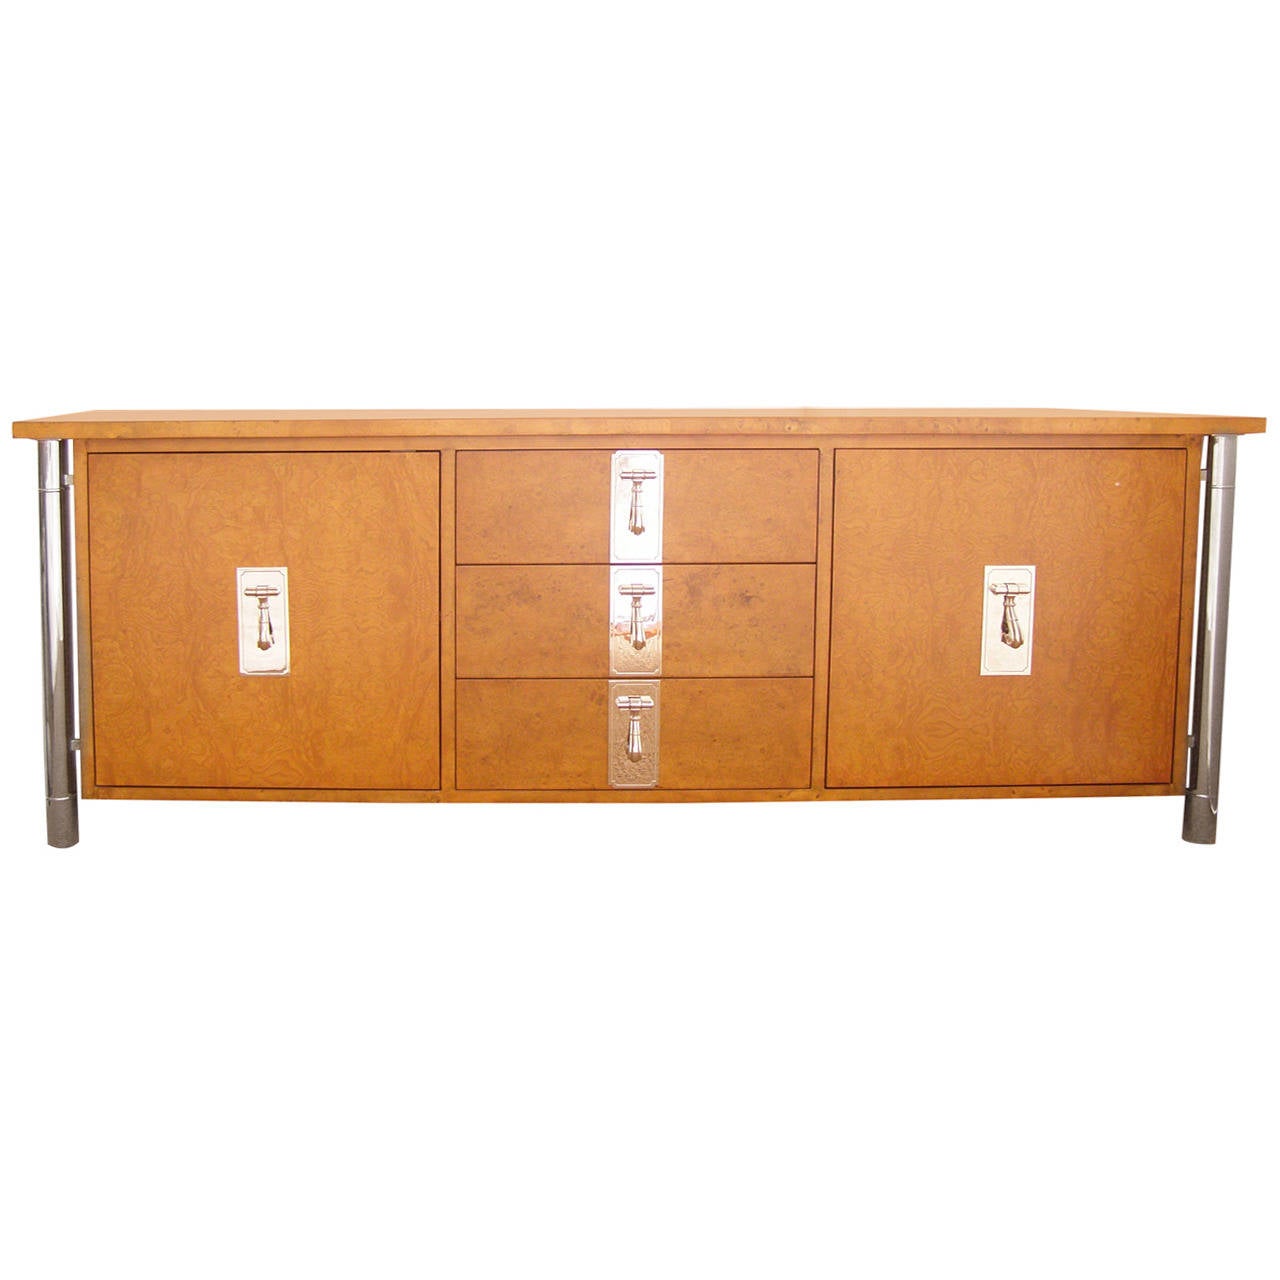 Exceptionally well made Mastercraft credenza in burl wood with 2 nickeled columns on either side and heavy nickeled drawer and door pulls.  Excellent storage capacity with 3 deep and wide drawers and cabinetry behind the doors. Finely refinished